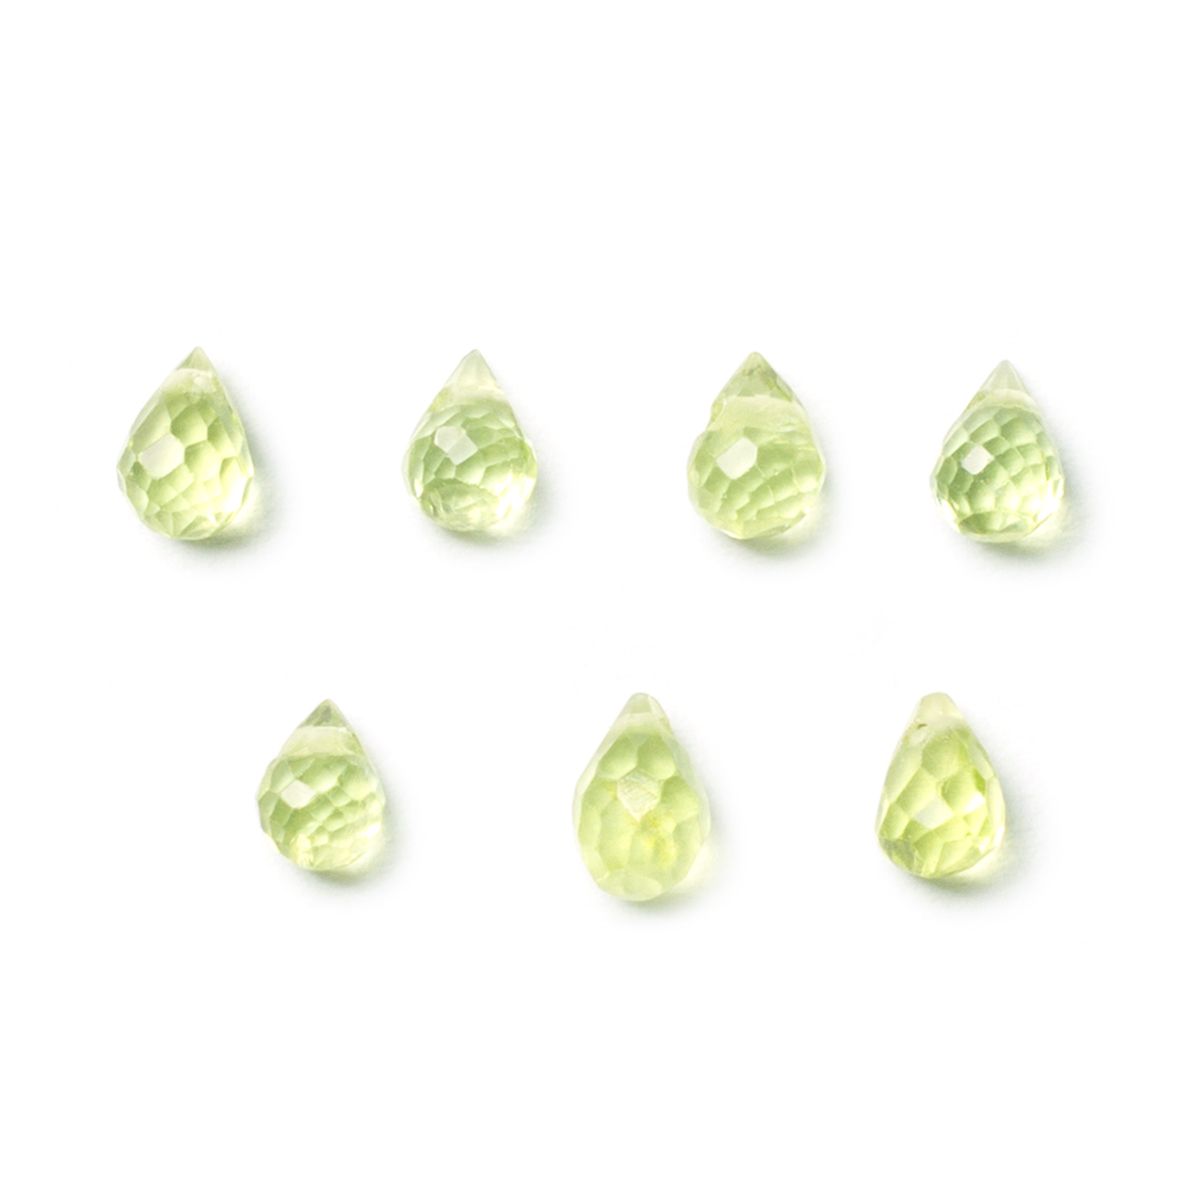 Peridot Faceted Drop Briolette Beads - Approx From 5x3mm